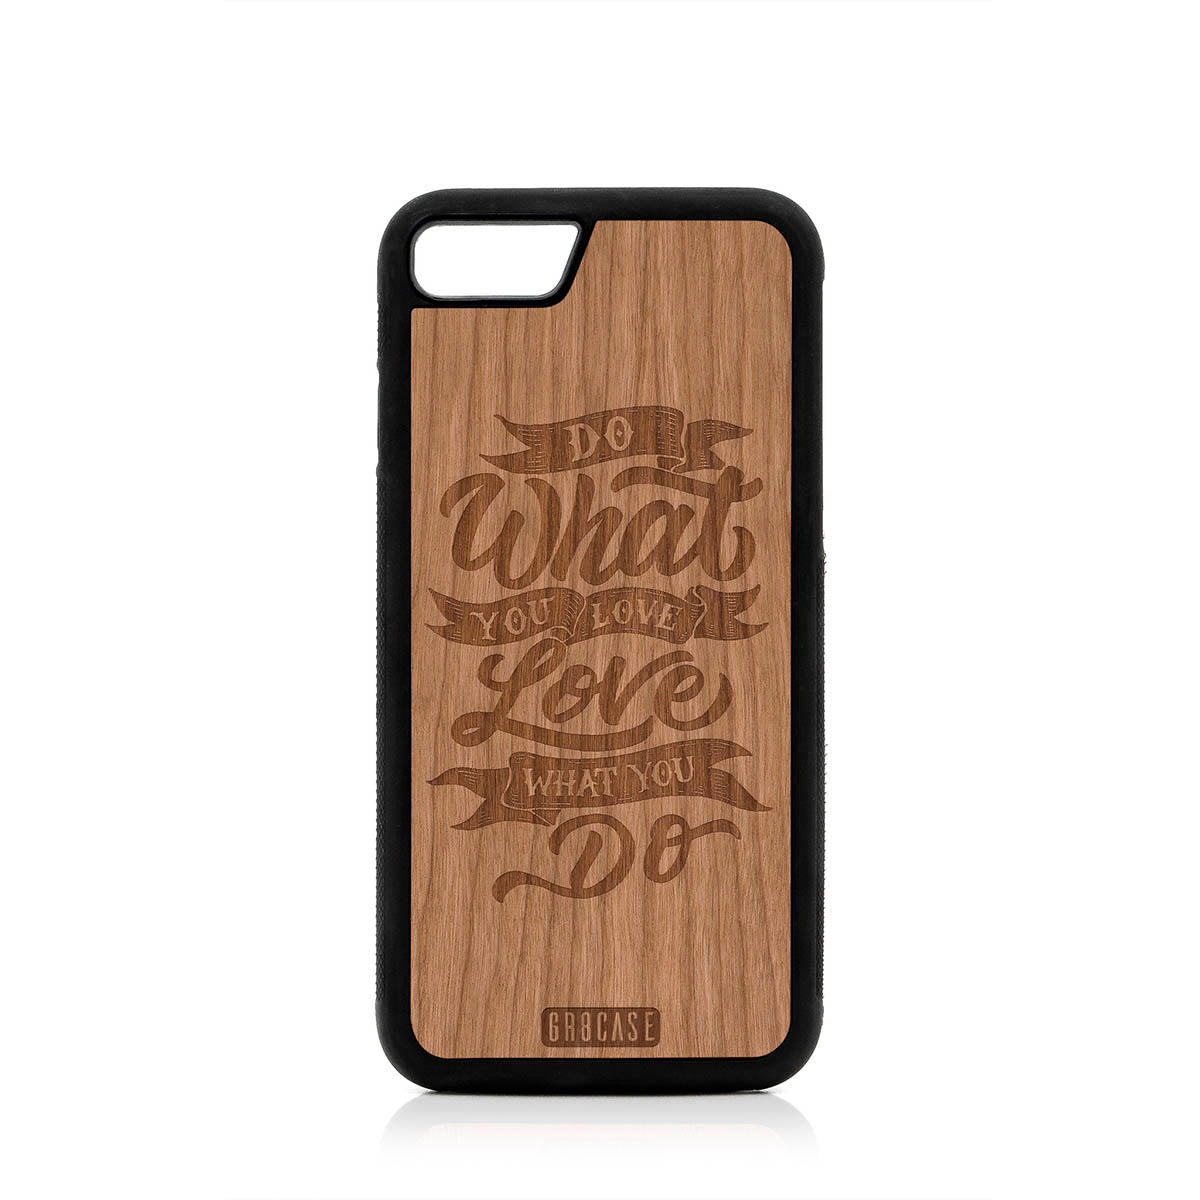 Do What You Love Love What You Do Design Wood Case For iPhone SE 2020 by GR8CASE